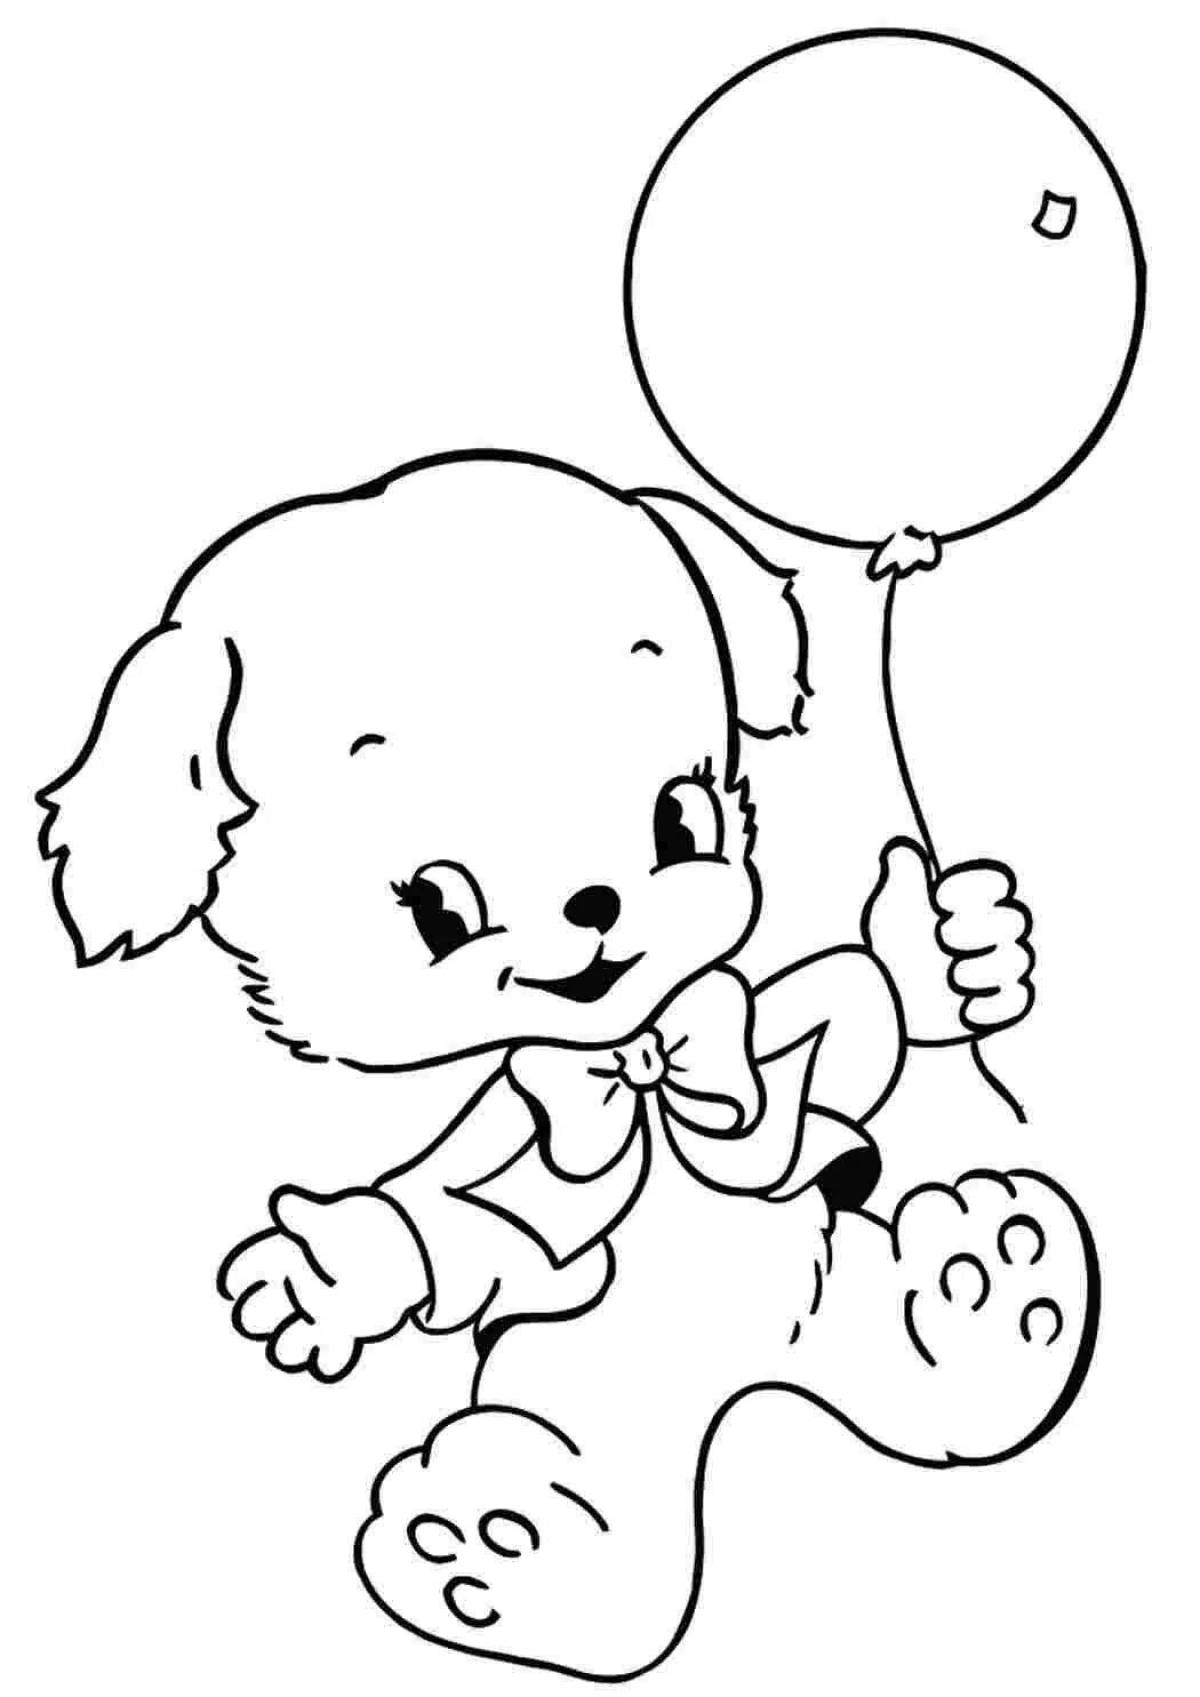 Bubble bunny with balloons